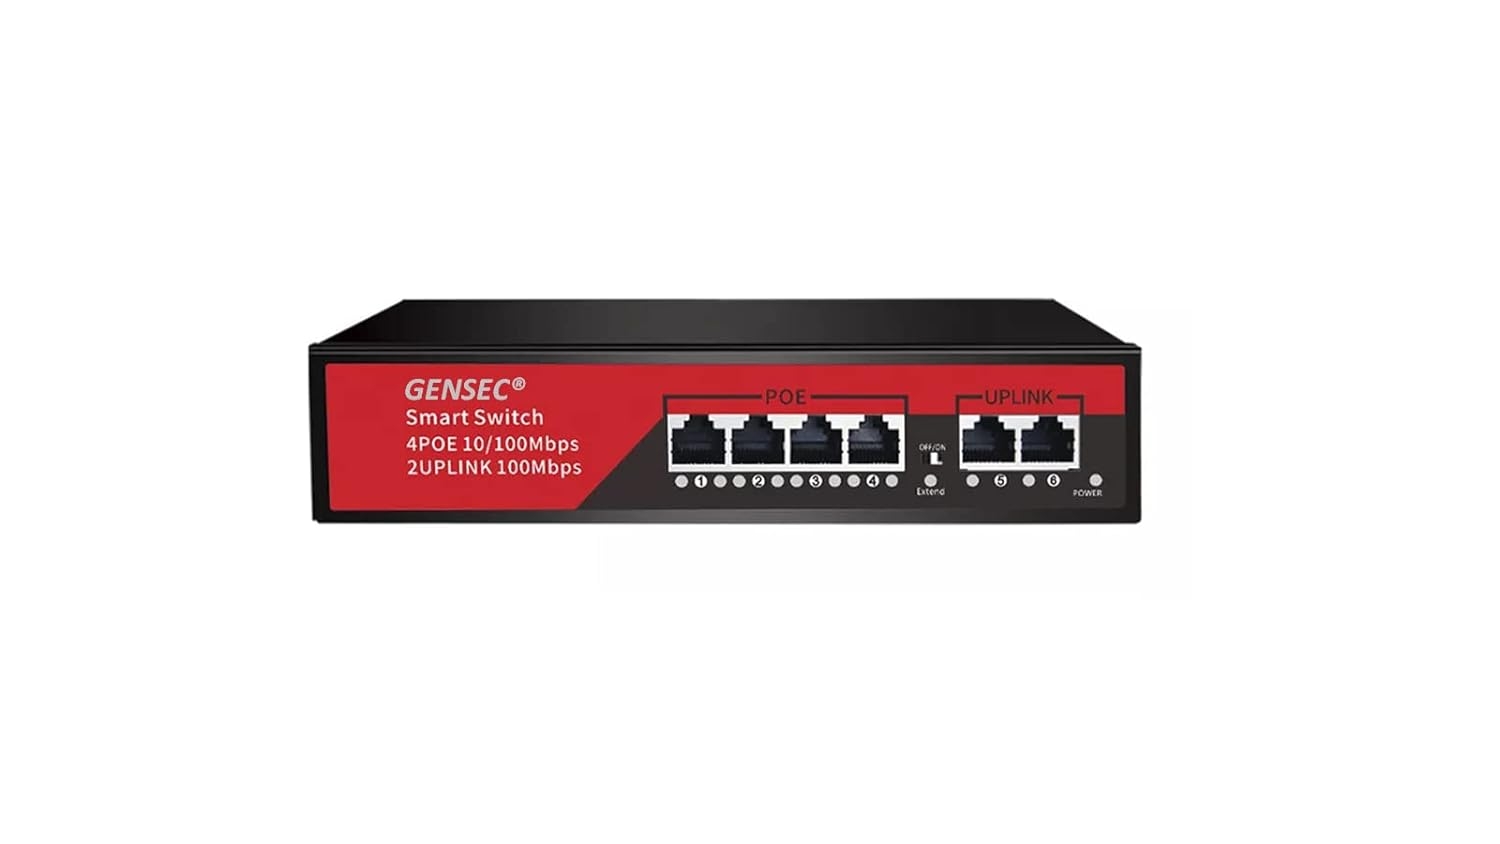 CP PLUS 4 Port PoE Switch with 2 Port Uplink, PoE Switch for Hikvision, CP Plus, Dahua, Uniview IP Cameras NVRs